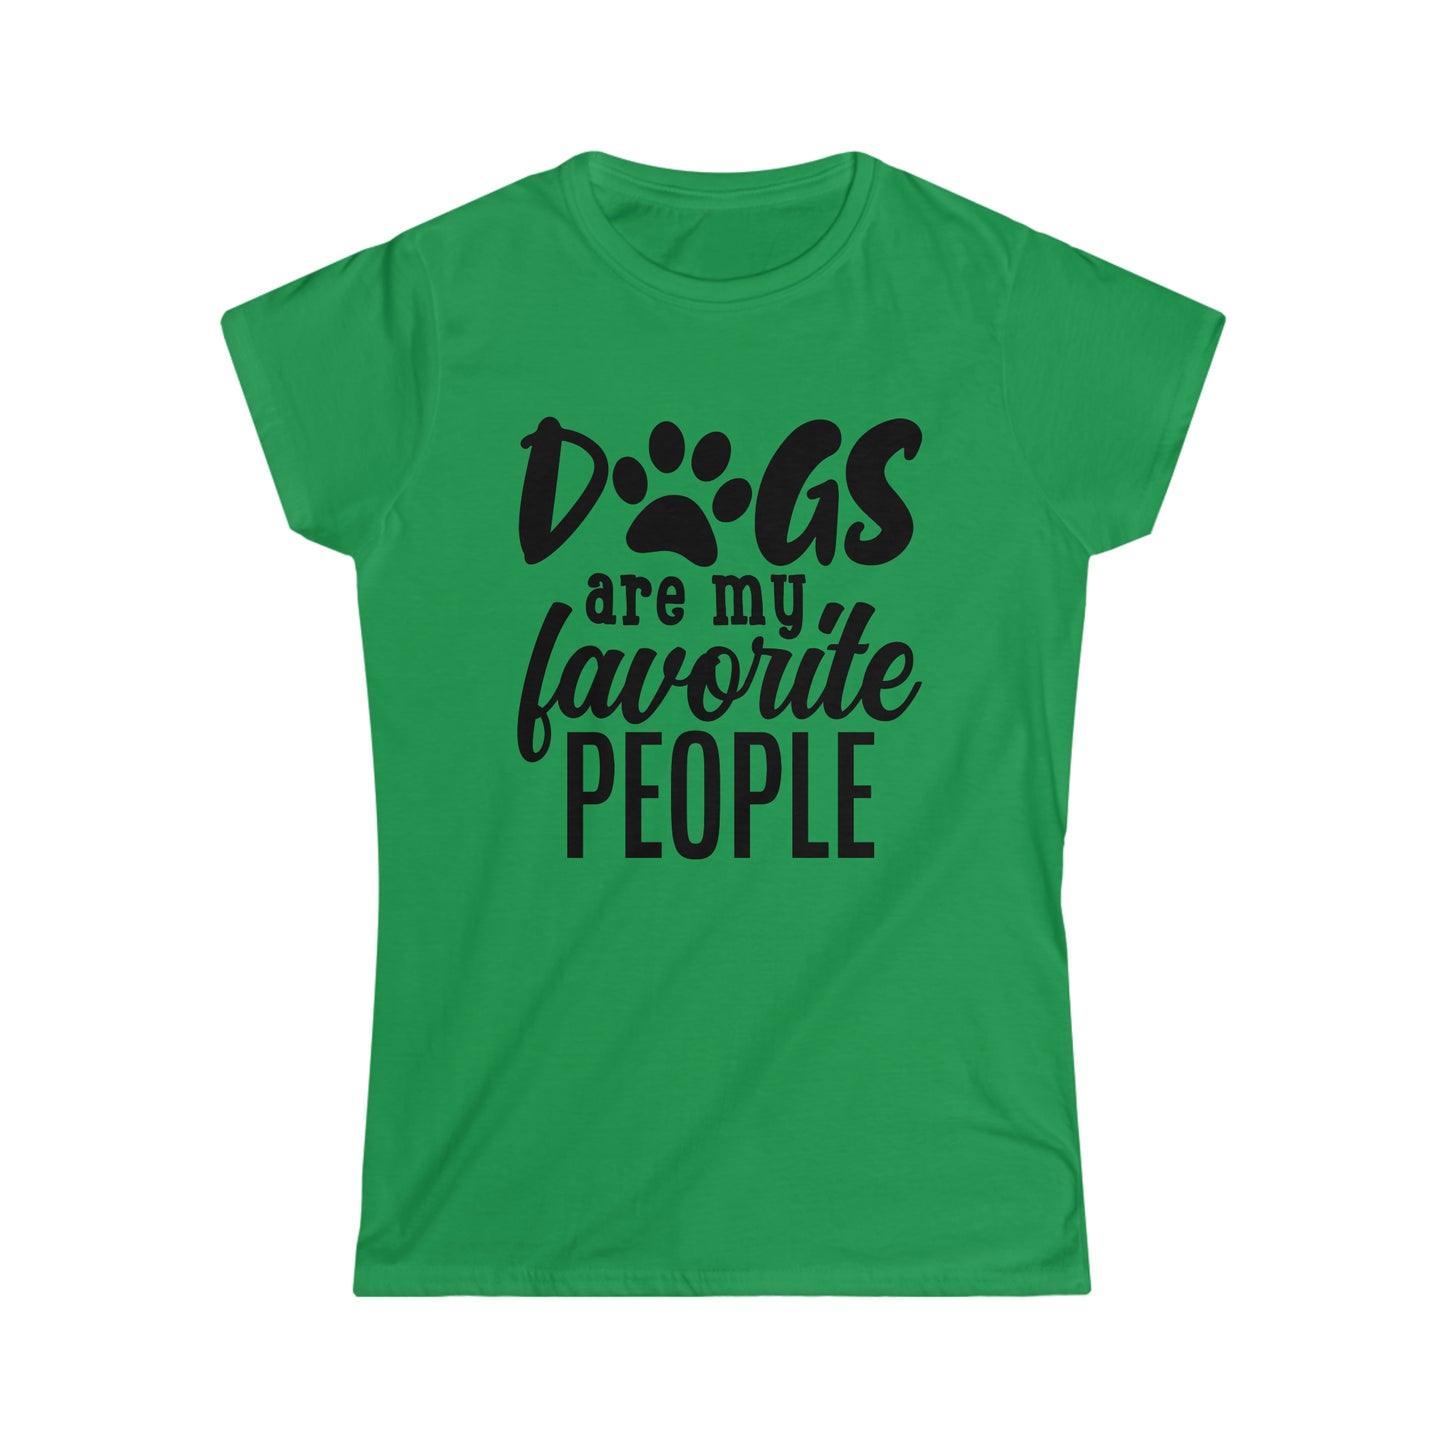 "Dogs Are My Favorite People" Women's Softstyle Tee